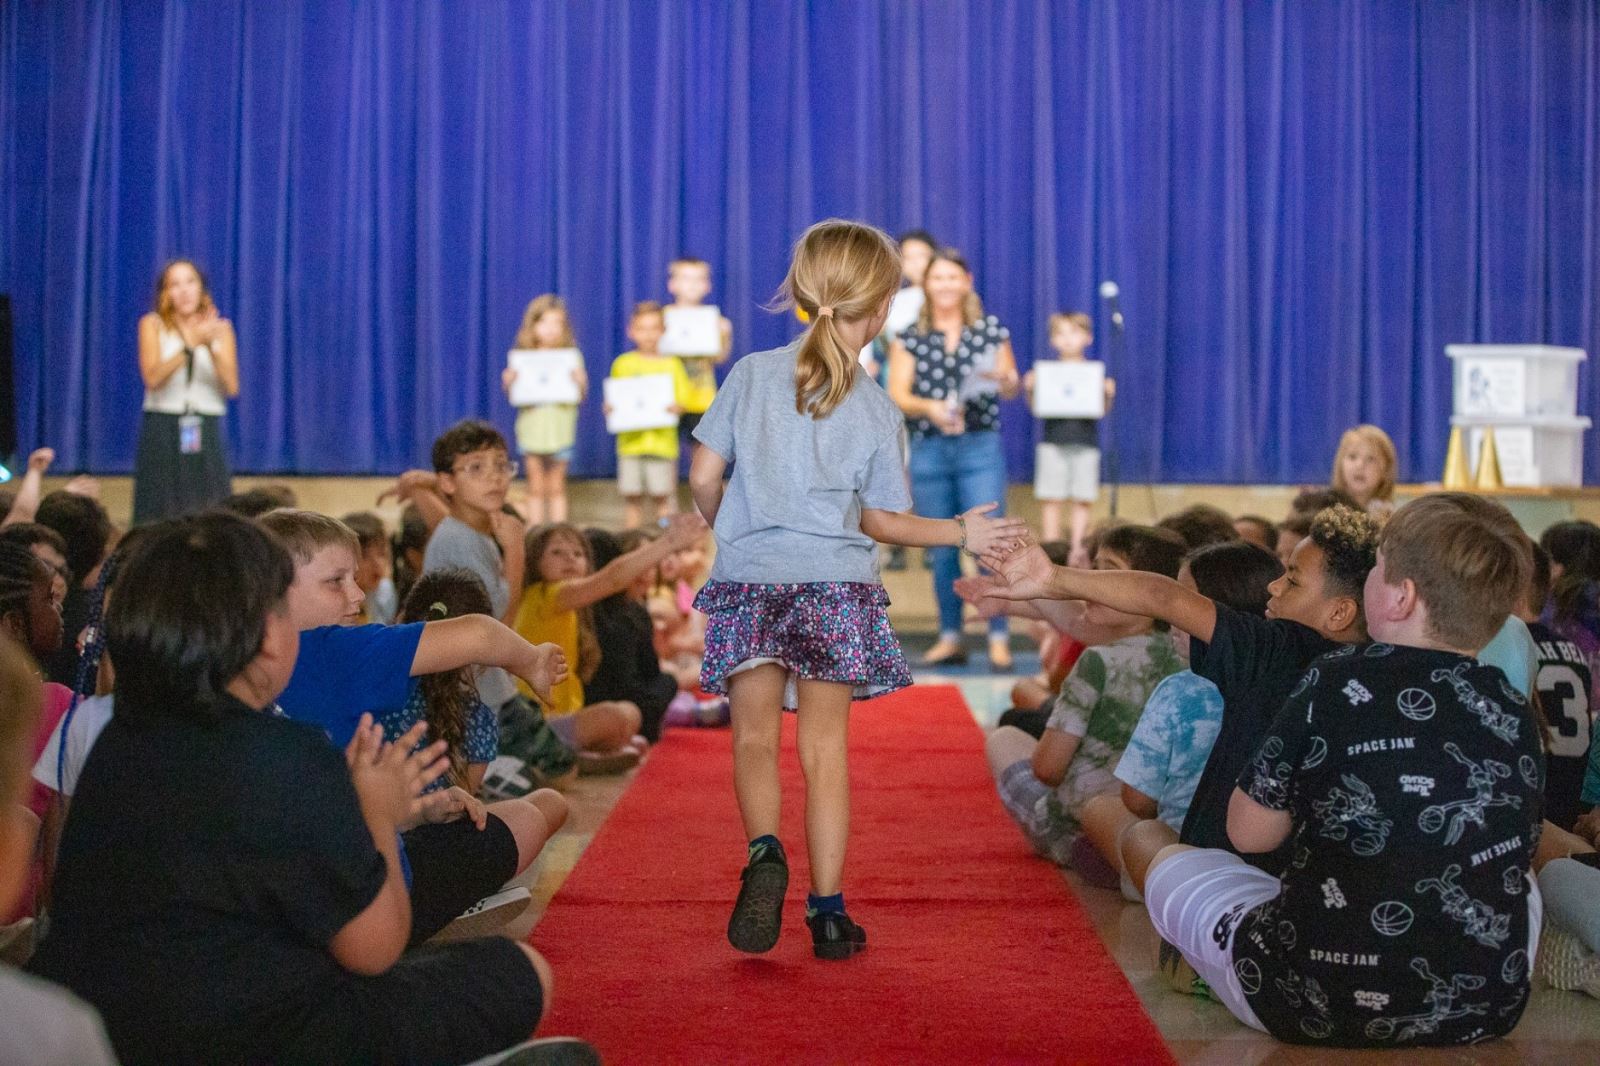 A young girl gives out high fives as she walks down the red carpet at the assembly.